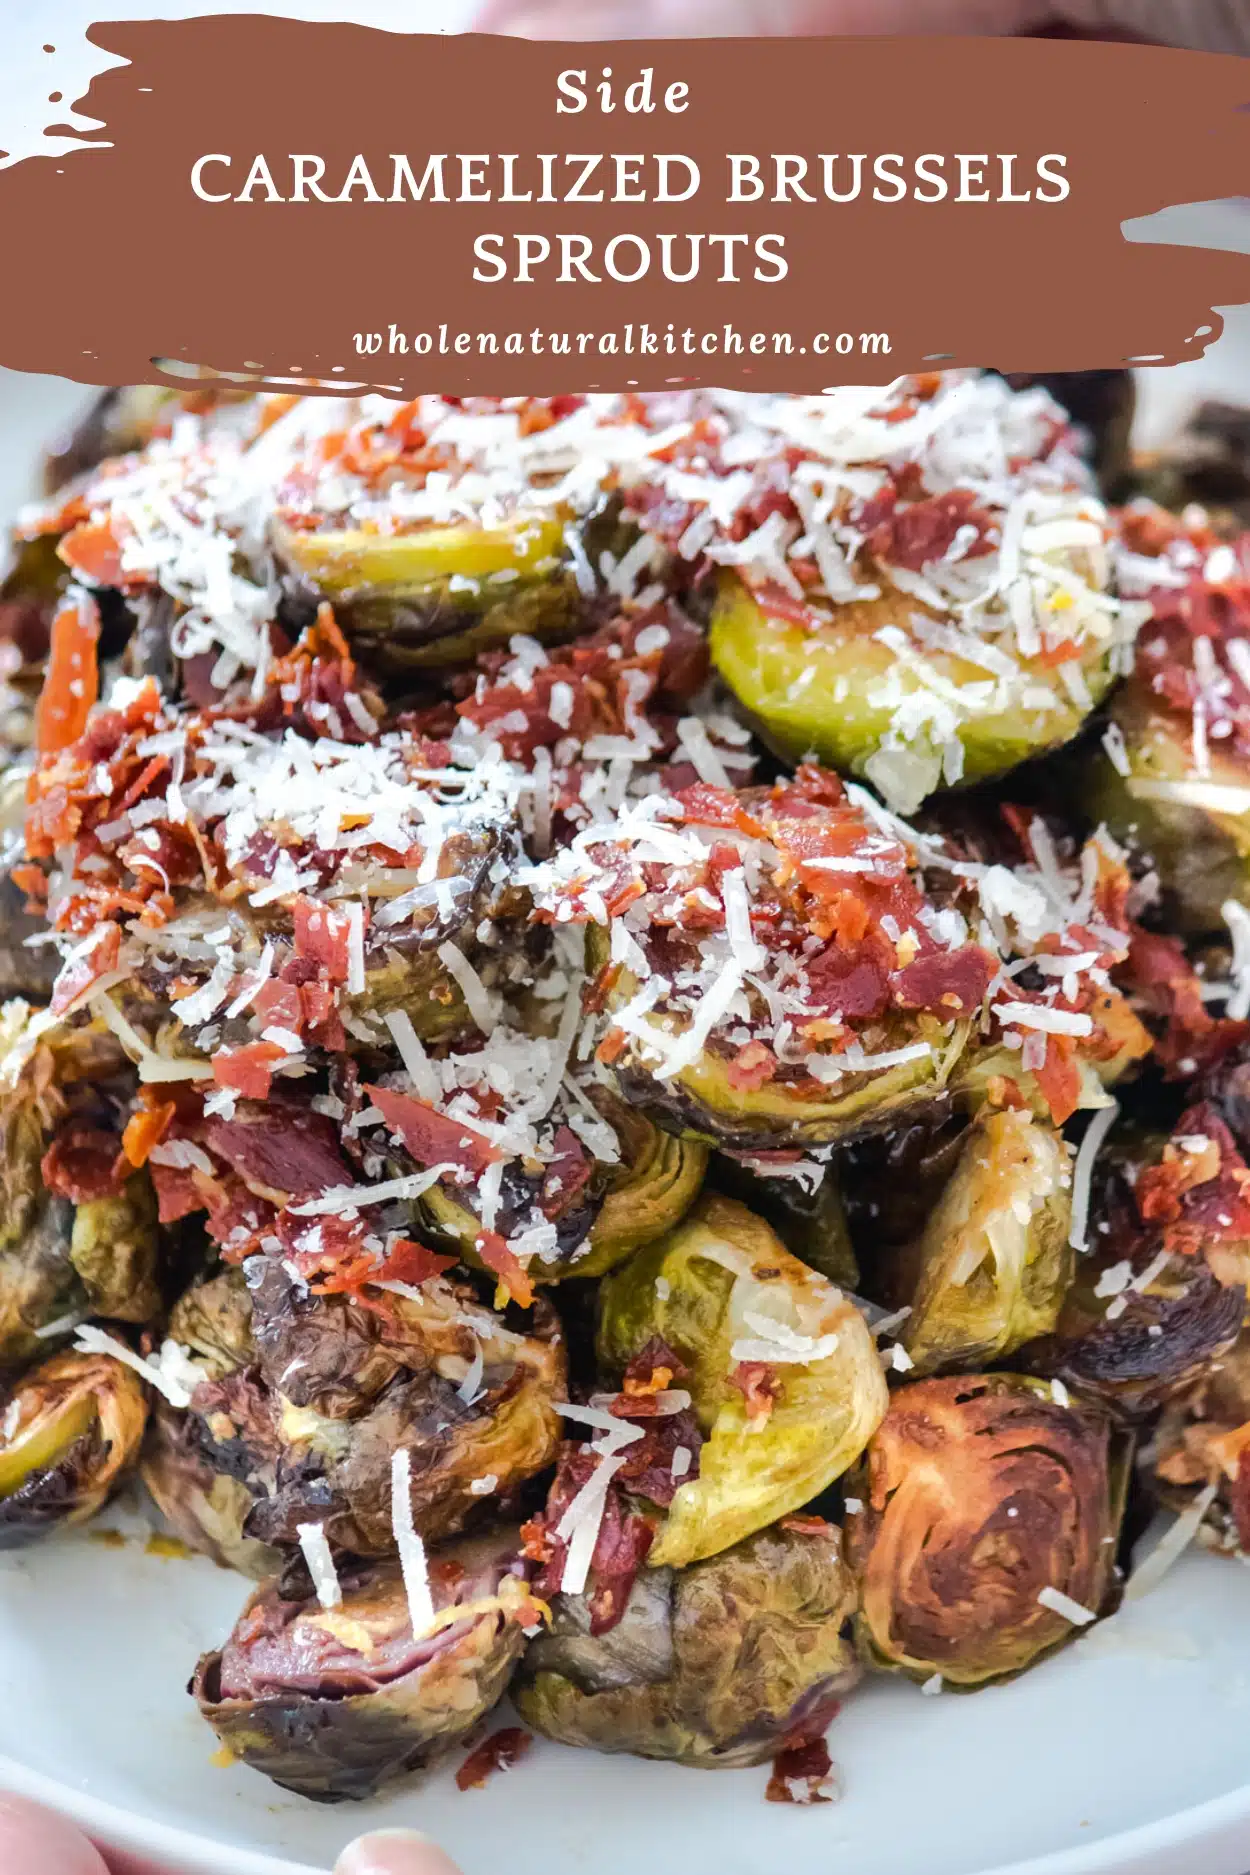 A Pinterest Poster image showing the name of the recipe at the top along with the website name, and a close up of the cooked sprouts on a plate filling the rest of the image. They've been sprinkled with cooked prosciutto and grated parmesan cheese.